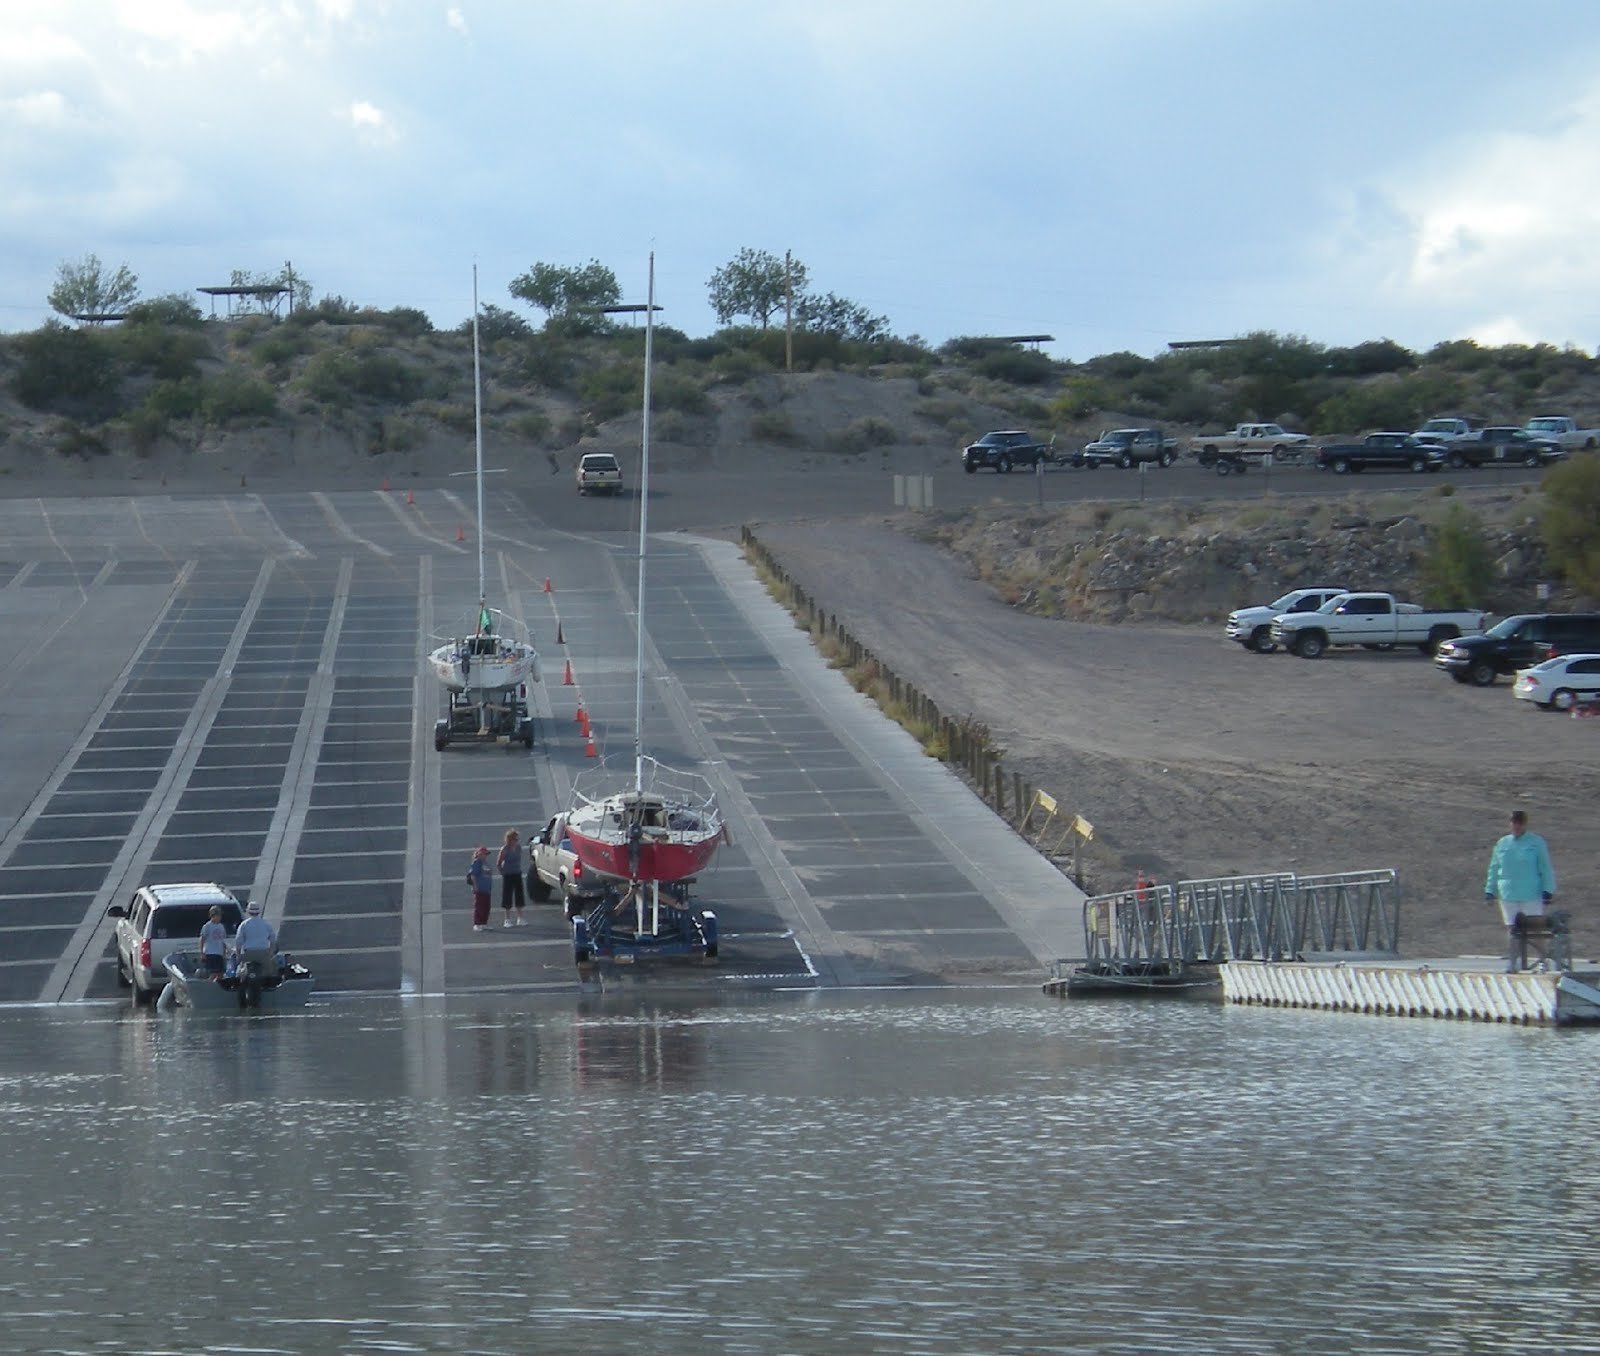 South Monticello Boat Ramp in 2009